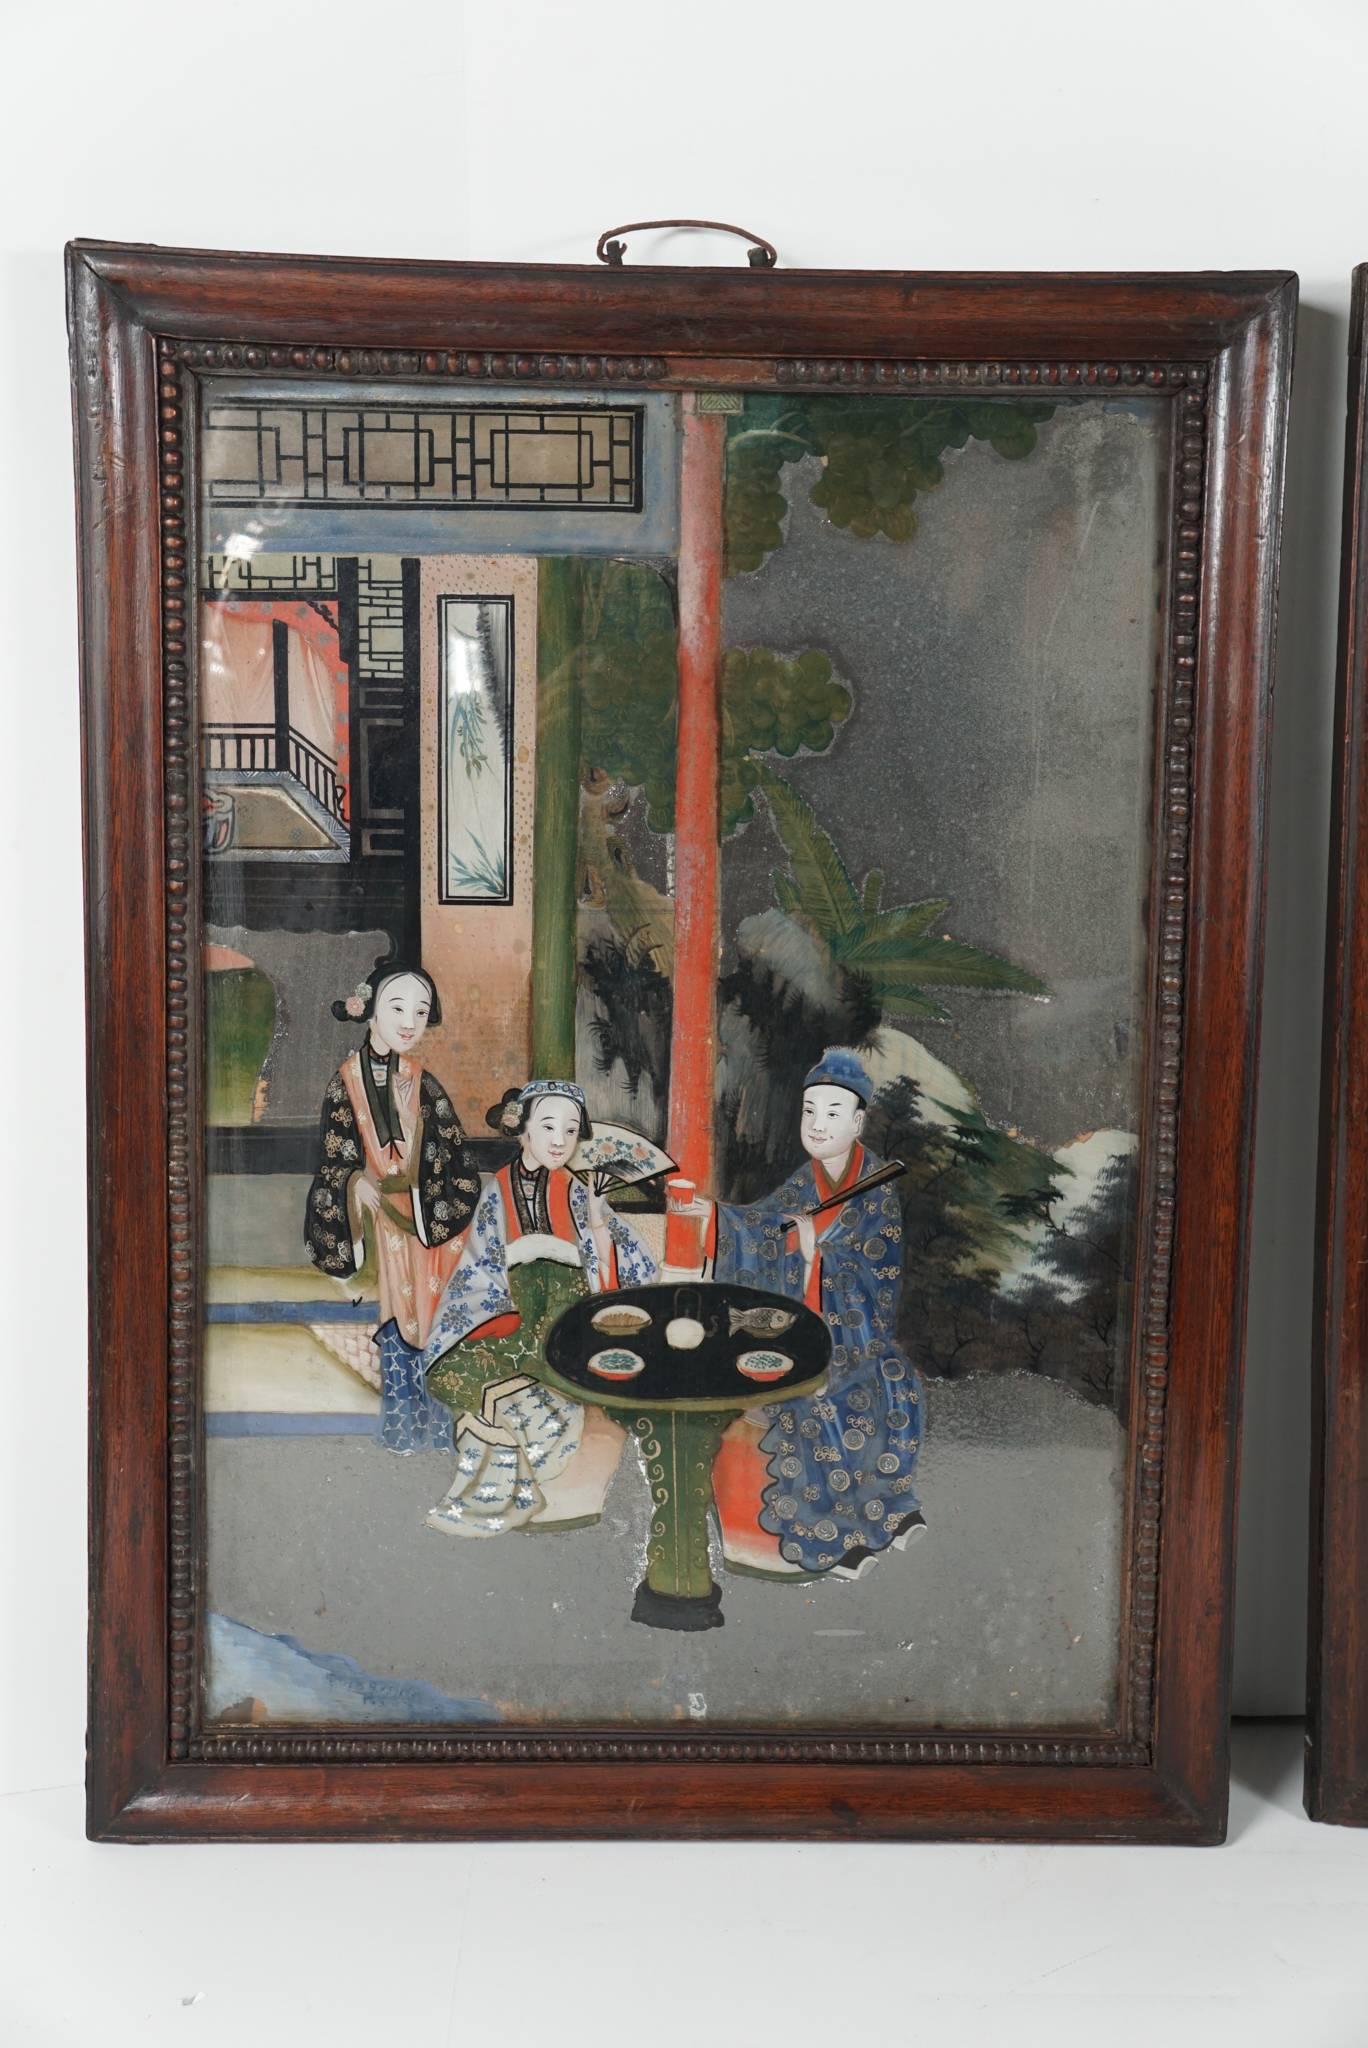 This set of three paintings done in reverse painting and mirror on glass come from the estate of Princess Fredericka Ann Guirey from her home Sigrist House in Nassau and hung in the drawing room which was decorated by Mallets Antiques of London, and